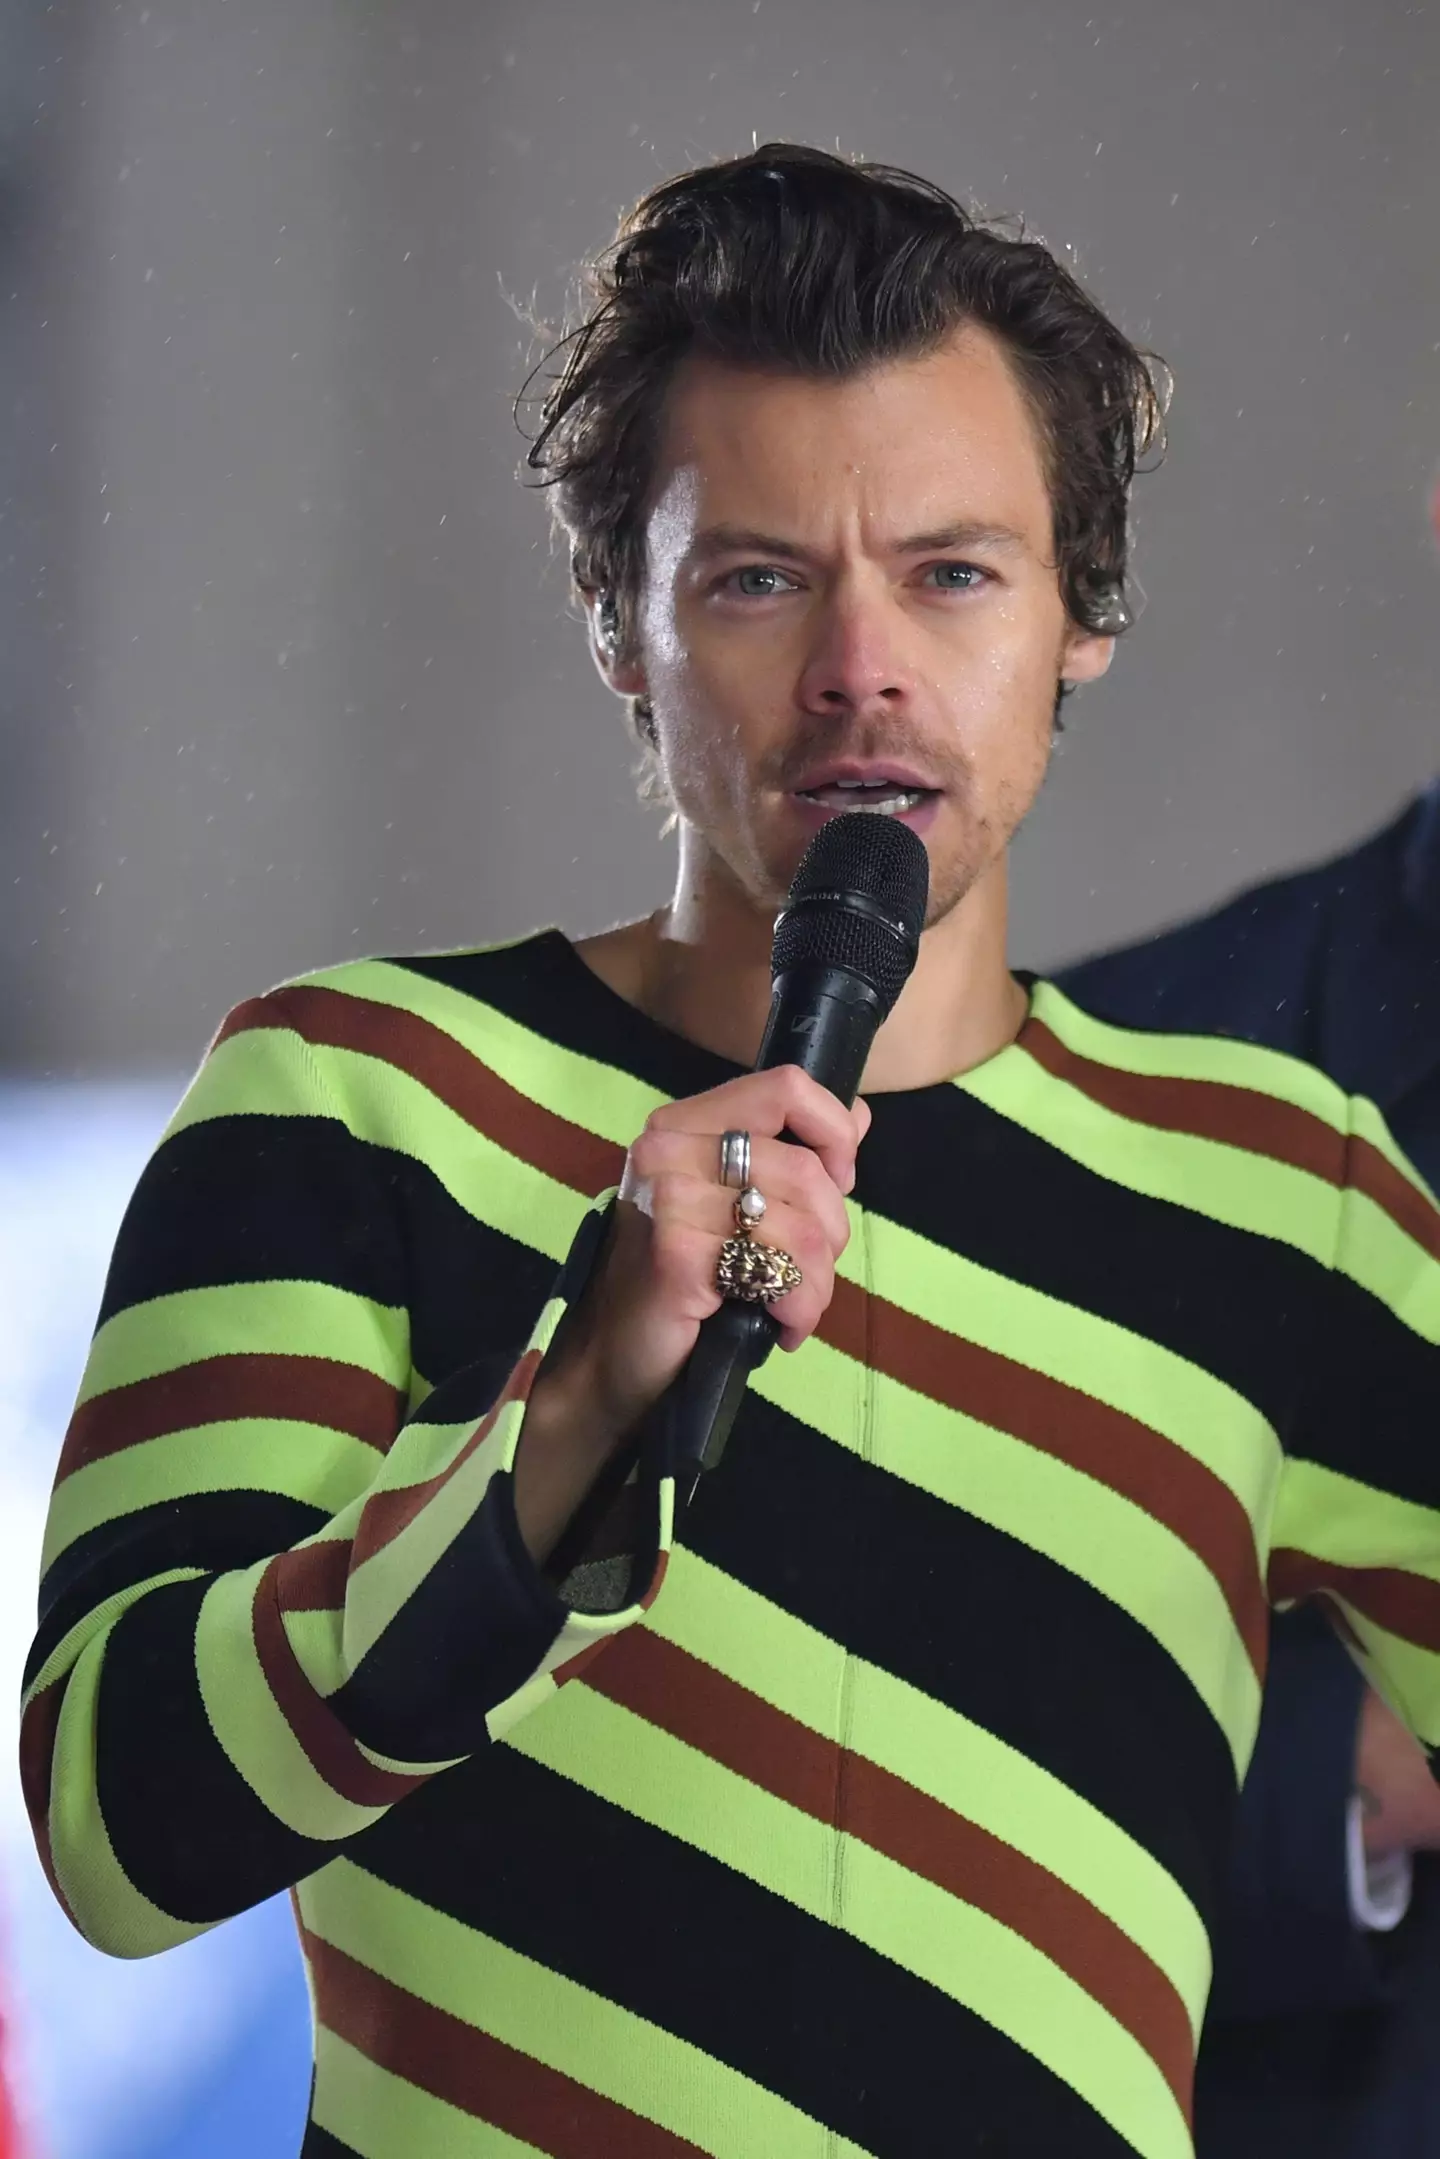 Harry Styles’ crew has been hijacked by armed gangsters in Brazil.